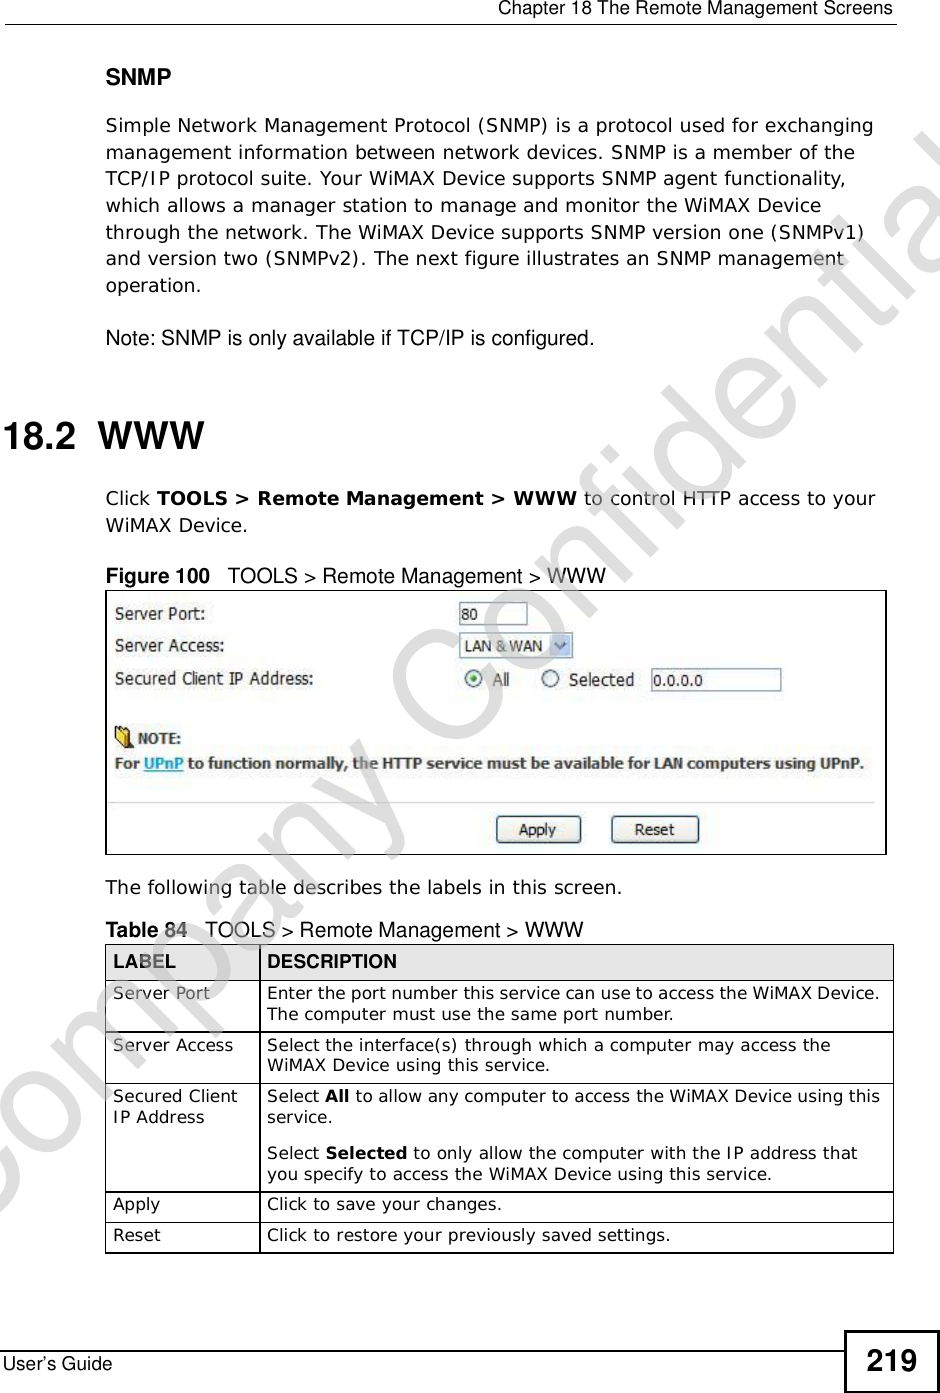  Chapter 18The Remote Management ScreensUser’s Guide 219SNMPSimple Network Management Protocol (SNMP) is a protocol used for exchanging management information between network devices. SNMP is a member of the TCP/IP protocol suite. Your WiMAX Device supports SNMP agent functionality, which allows a manager station to manage and monitor the WiMAX Device through the network. The WiMAX Device supports SNMP version one (SNMPv1) and version two (SNMPv2). The next figure illustrates an SNMP management operation.Note: SNMP is only available if TCP/IP is configured.18.2  WWWClick TOOLS &gt; Remote Management &gt; WWW to control HTTP access to your WiMAX Device.Figure 100   TOOLS &gt; Remote Management &gt; WWWThe following table describes the labels in this screen.       Table 84   TOOLS &gt; Remote Management &gt; WWWLABEL DESCRIPTIONServer Port Enter the port number this service can use to access the WiMAX Device. The computer must use the same port number.Server Access Select the interface(s) through which a computer may access the WiMAX Device using this service.Secured Client IP Address Select All to allow any computer to access the WiMAX Device using this service.Select Selected to only allow the computer with the IP address that you specify to access the WiMAX Device using this service.Apply Click to save your changes.Reset Click to restore your previously saved settings.Company Confidential